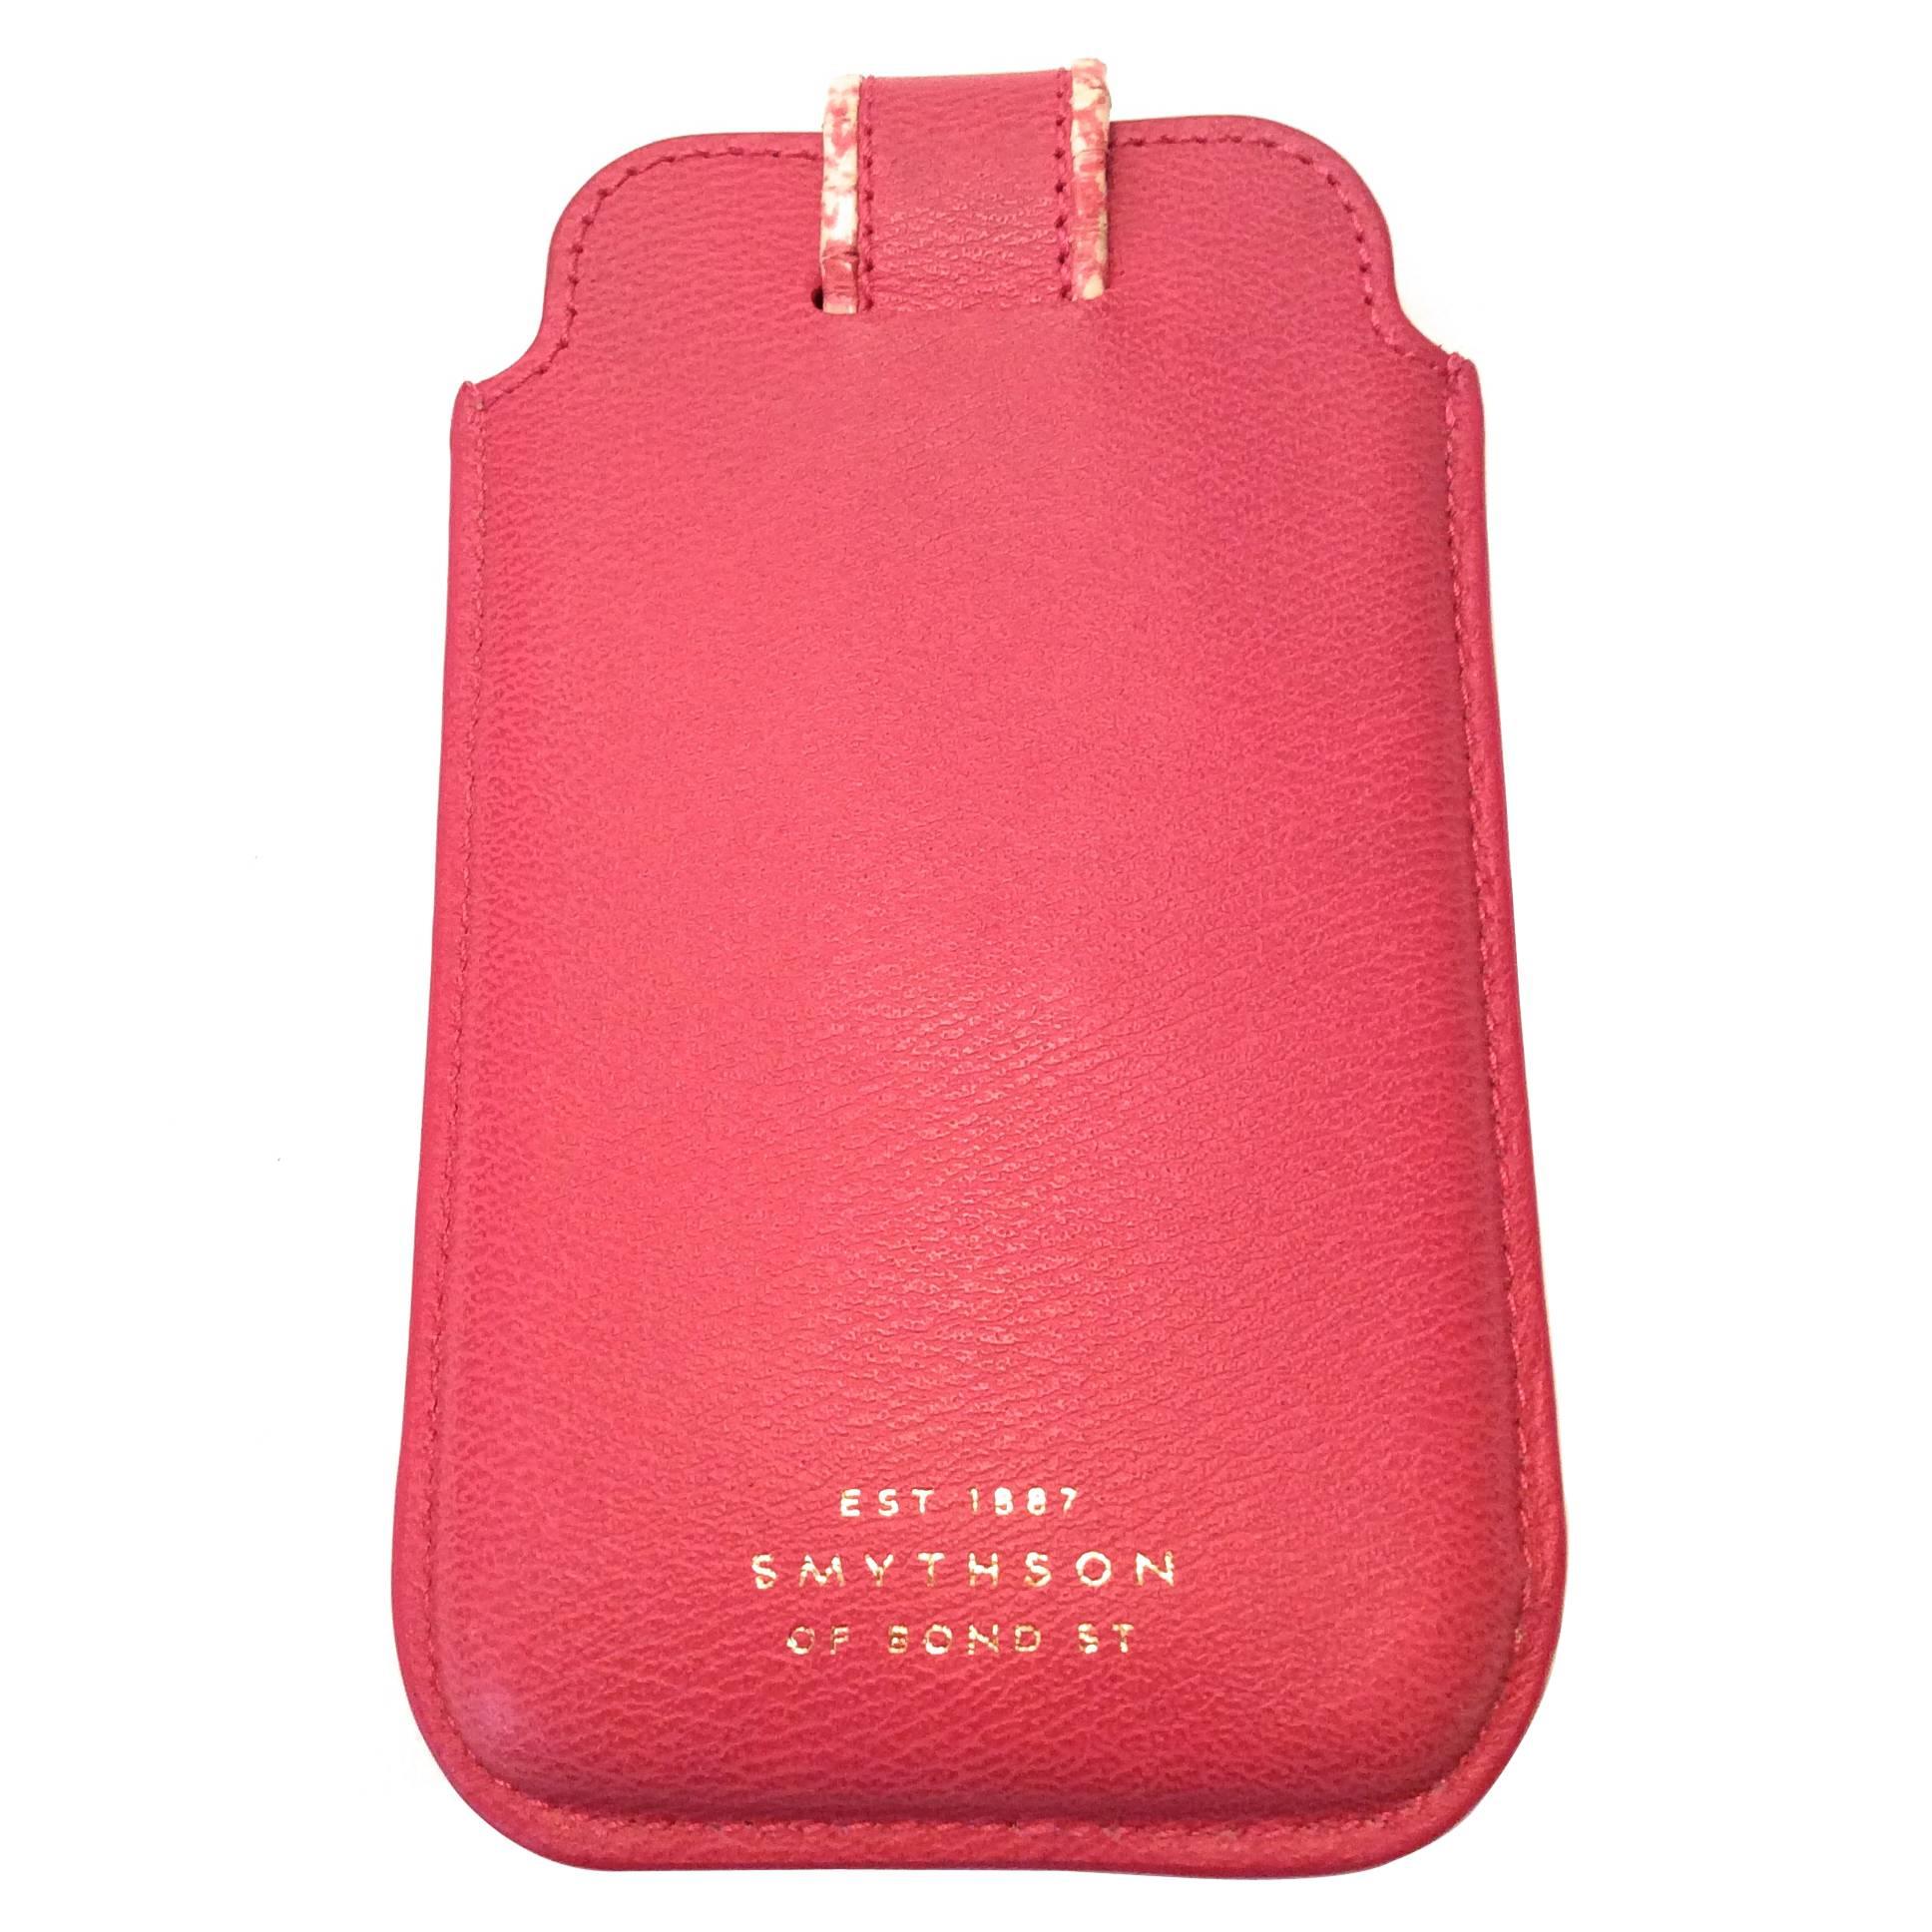 This Smythson of Bond Street pink cell phone / credit card holder is a great example of the craftsmanship of Smythson products. The case is made of out beautifully designed pink leather. The enclosure is trimp with a beautiful white and pink python